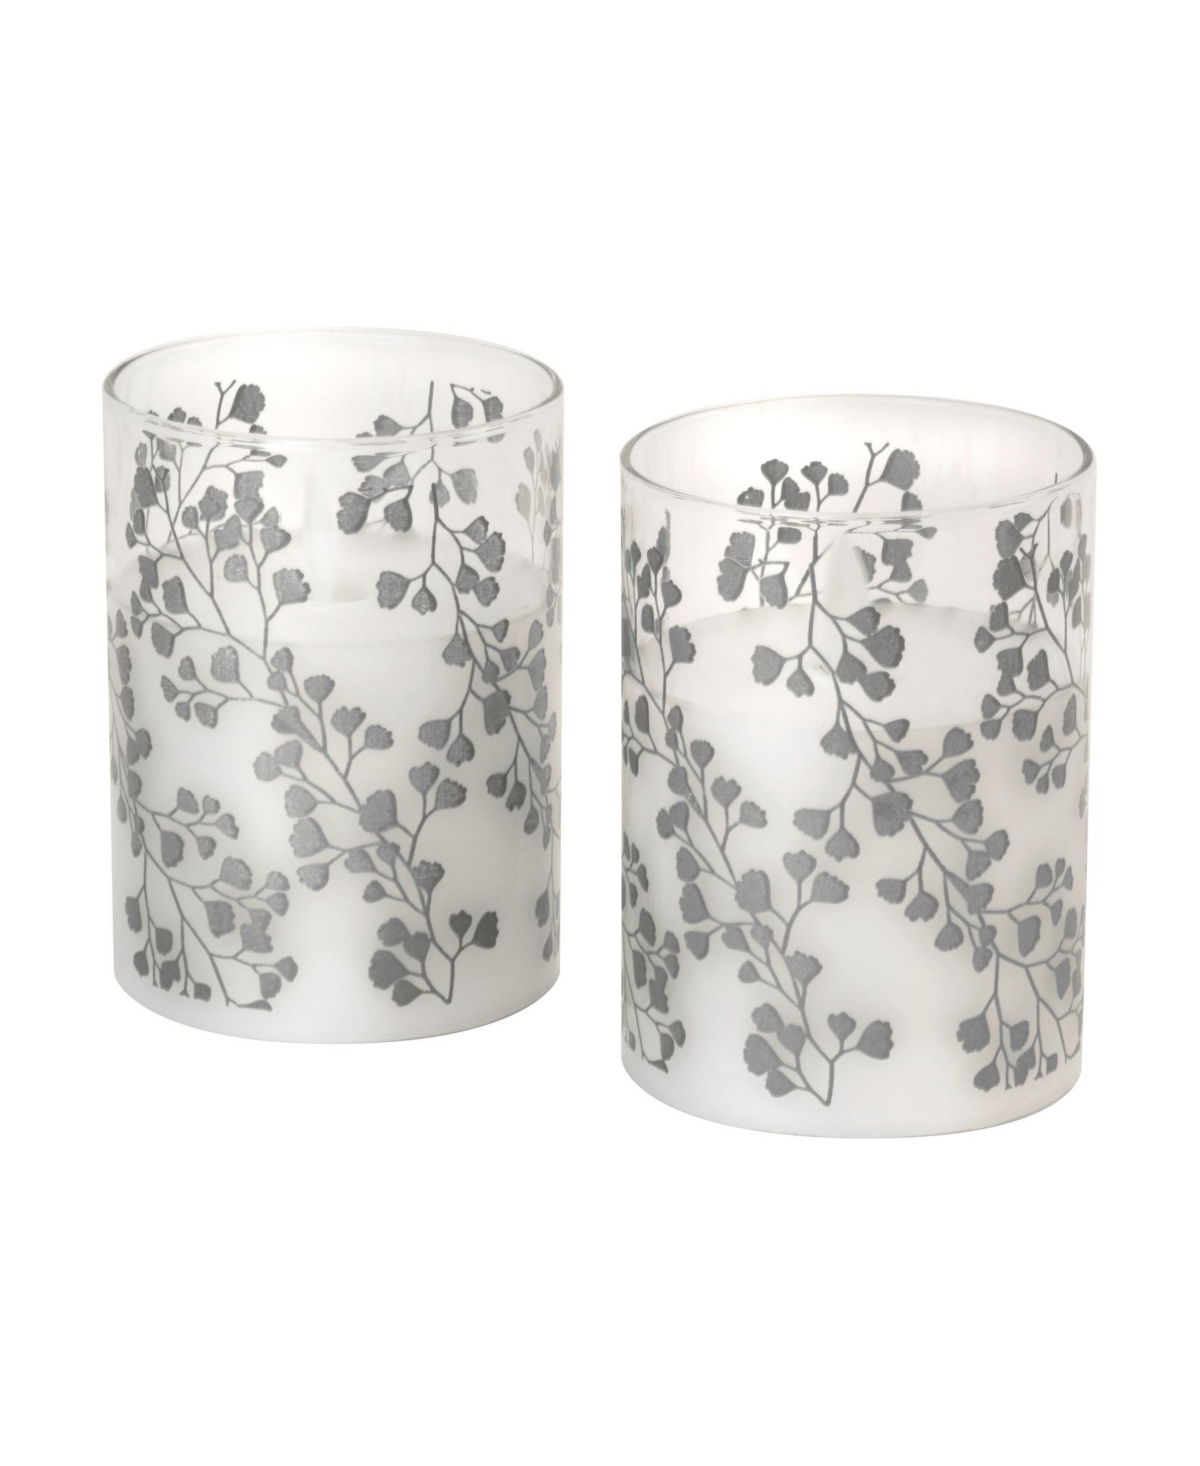 Battery Operated Fern Led Glass Candles with Moving Flame, Set of 2 - Silver-Tone